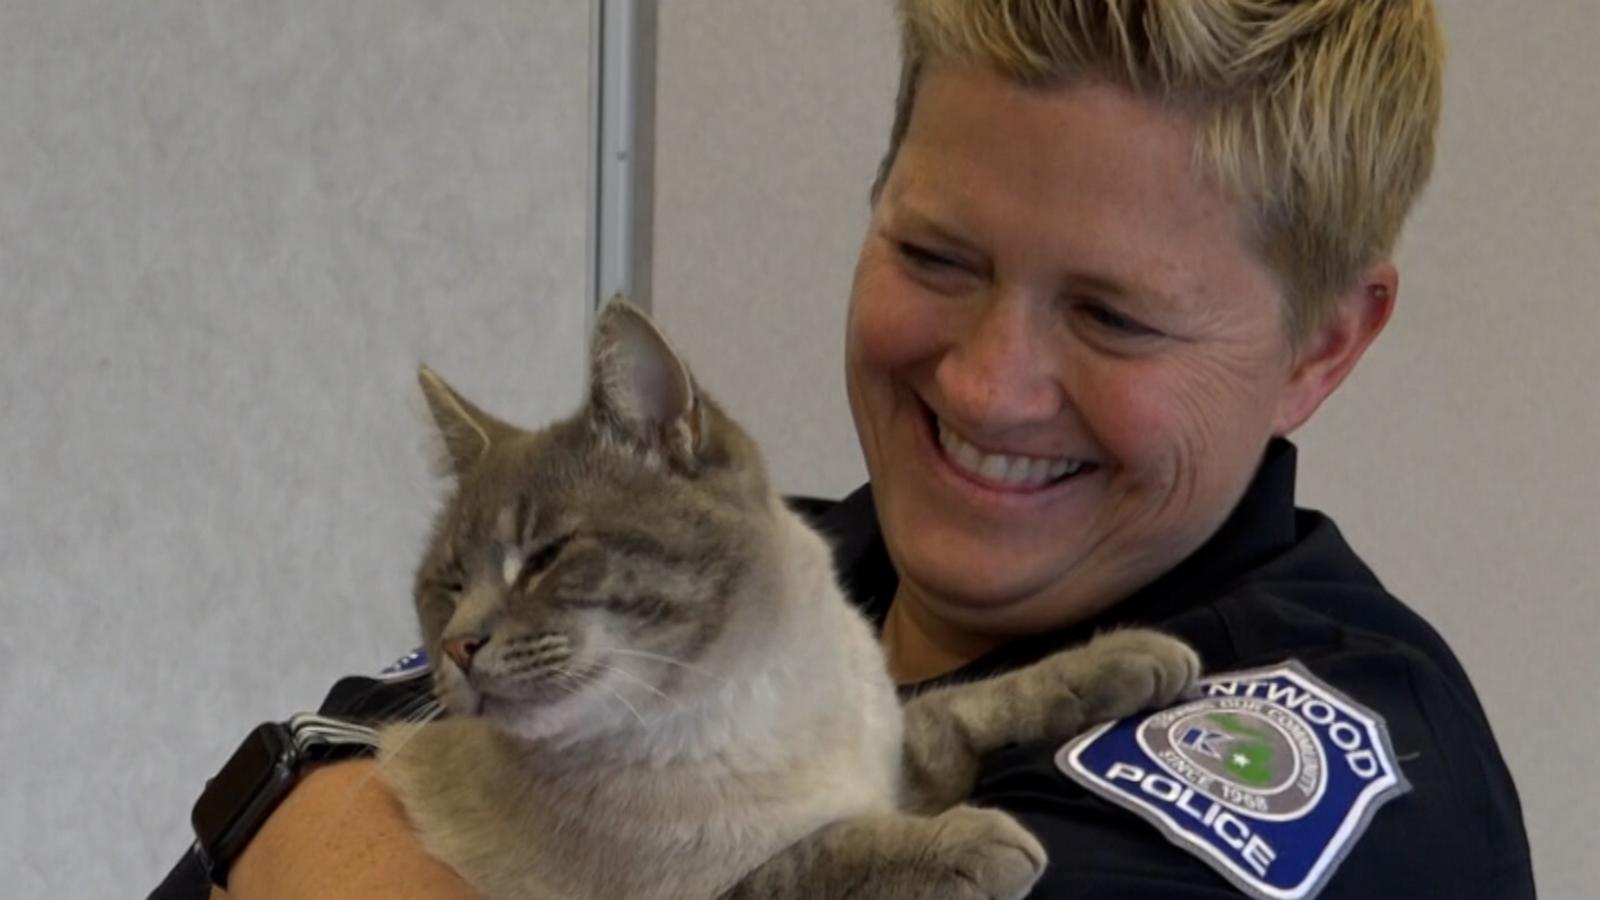 VIDEO: This cat showed up at a police station. Now he's part of the force as ‘Officer Donut’